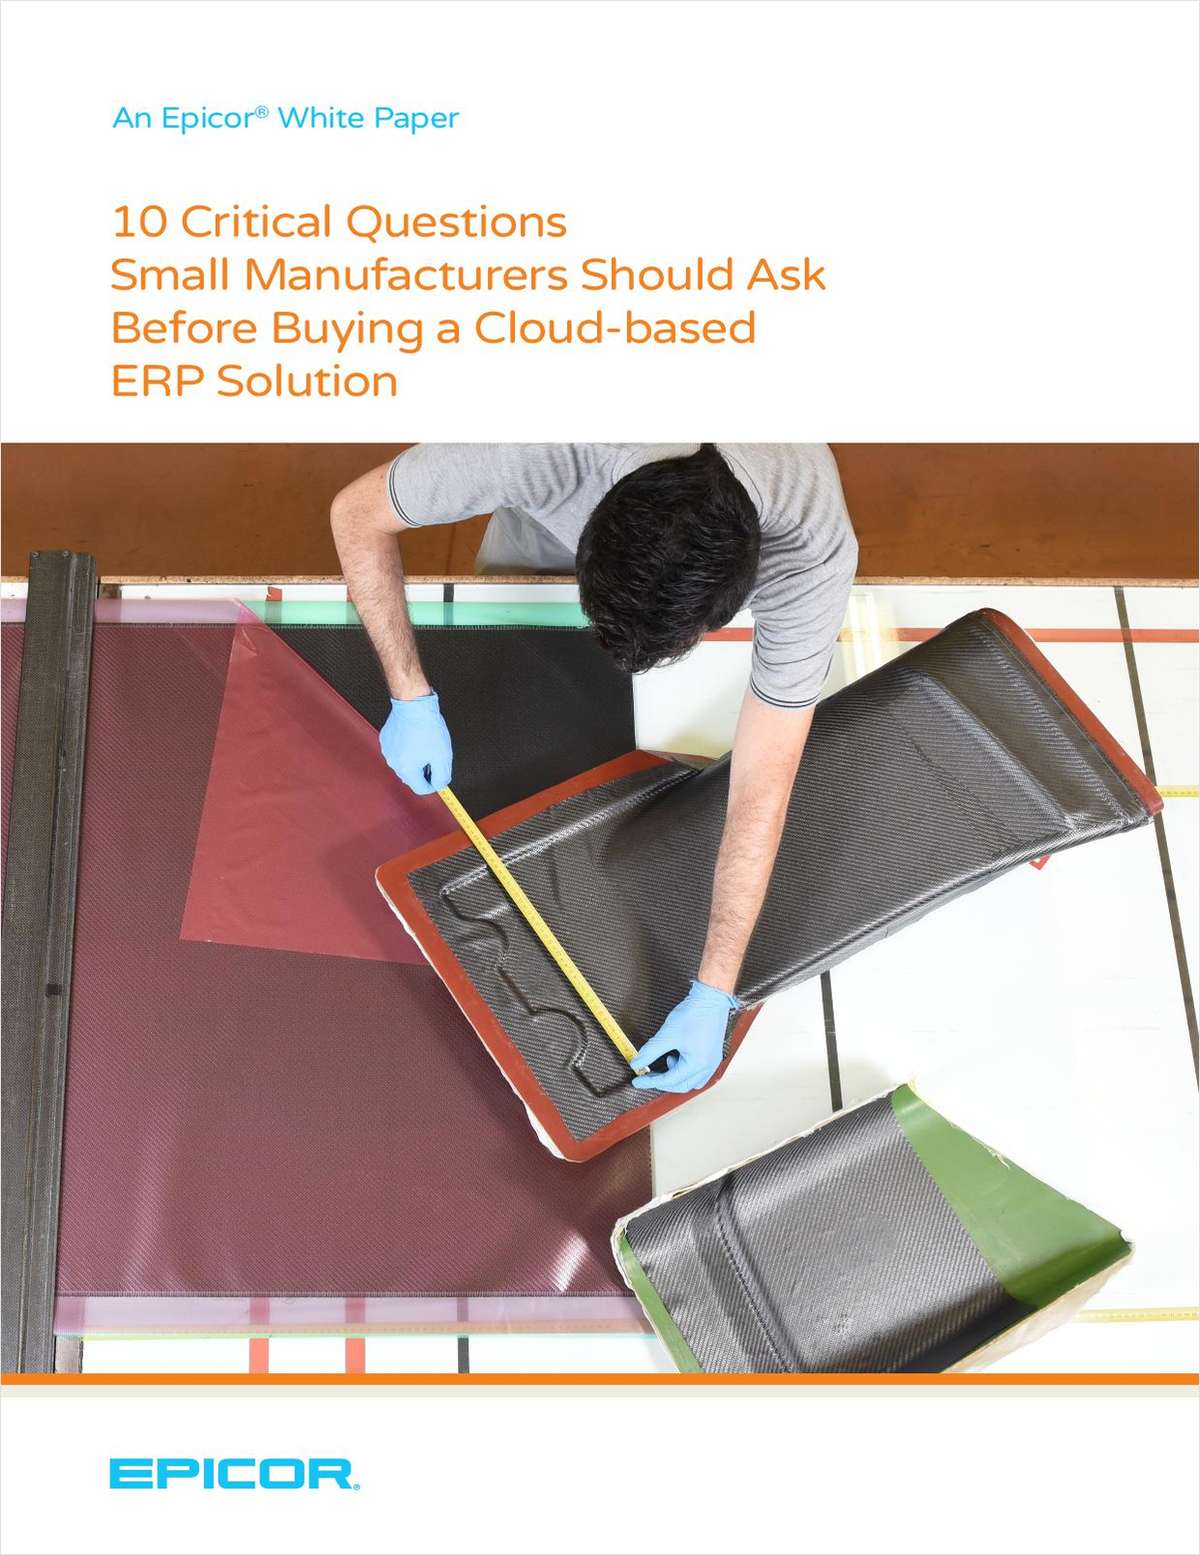 10 Critical Questions Small Manufacturers Should Ask Before Choosing a Cloud-based ERP Solution